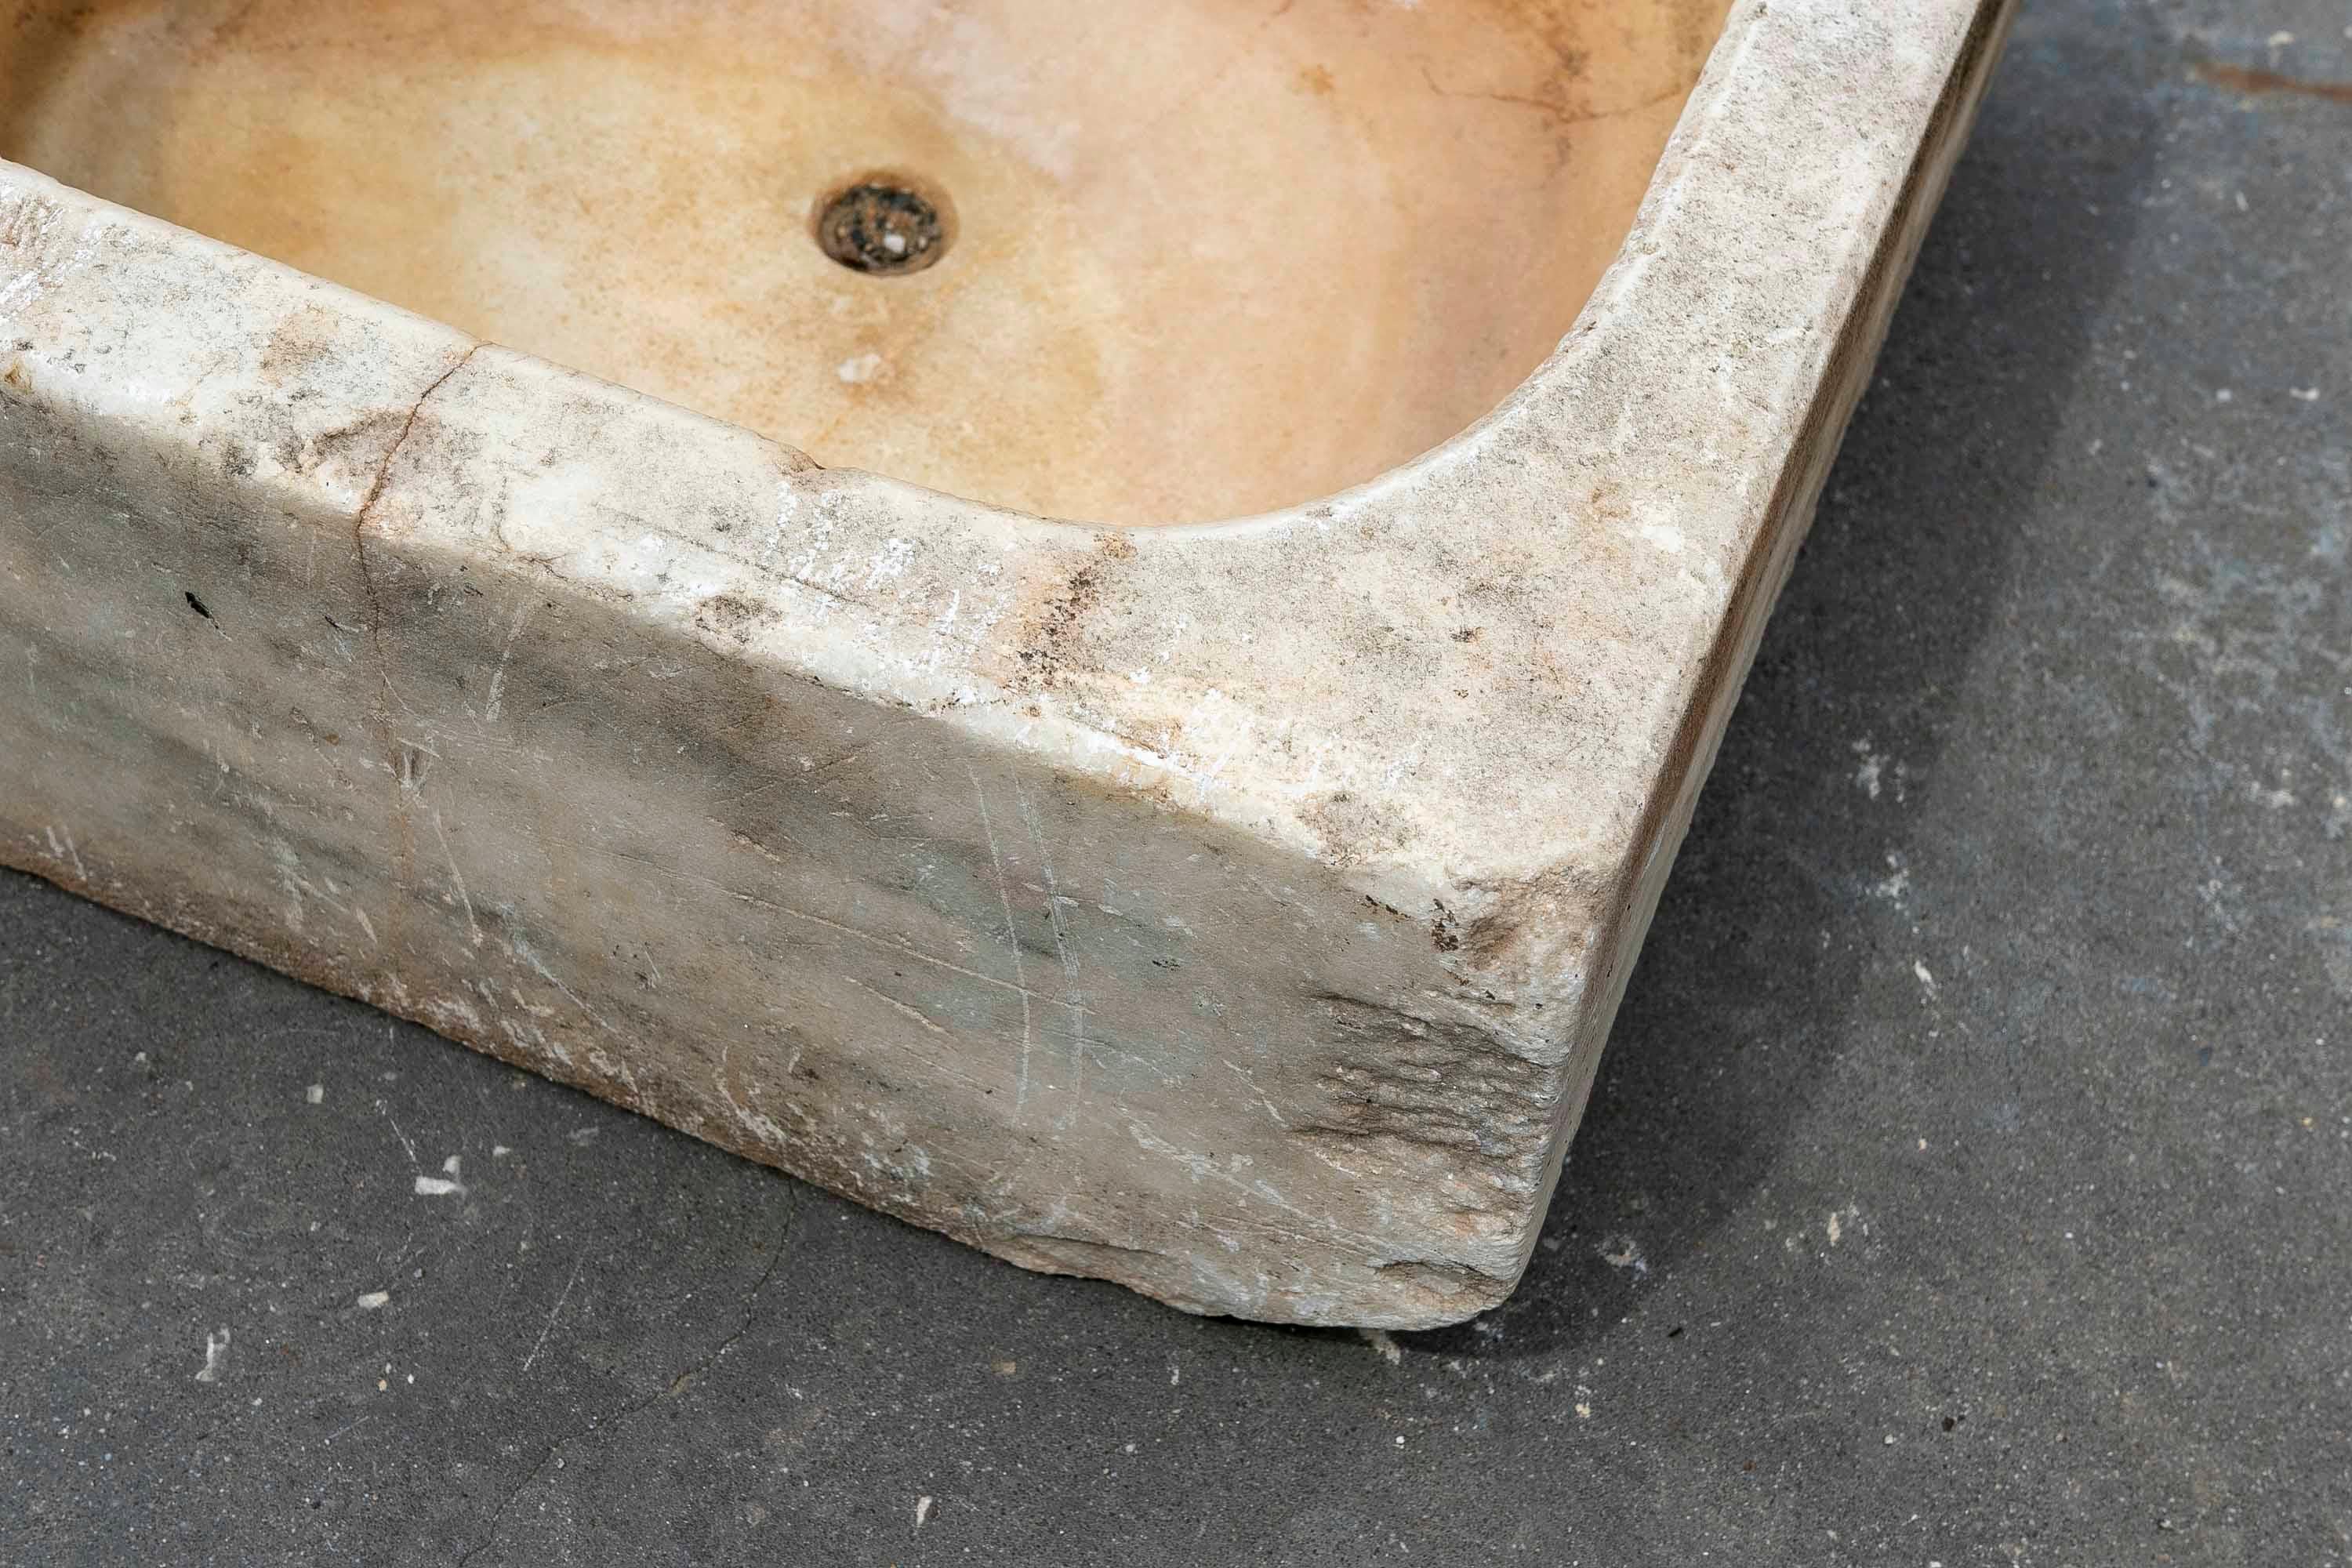 White Hand-Carved Marble Washbasin with One Sink in a Single Block.